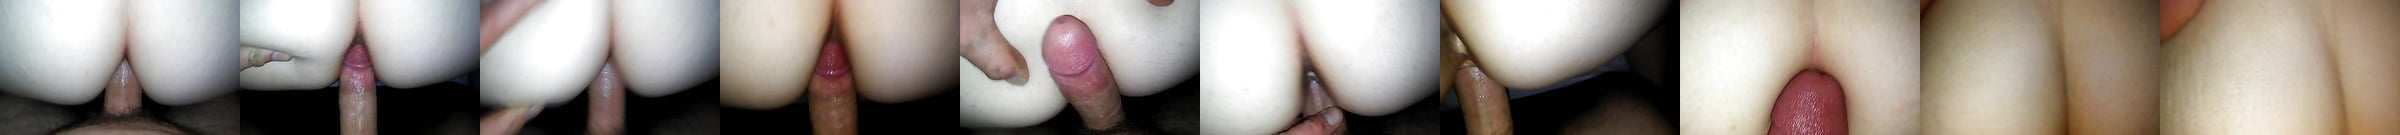 First Time Anal Free Anal Tube Porn Video 3c XHamster XHamster